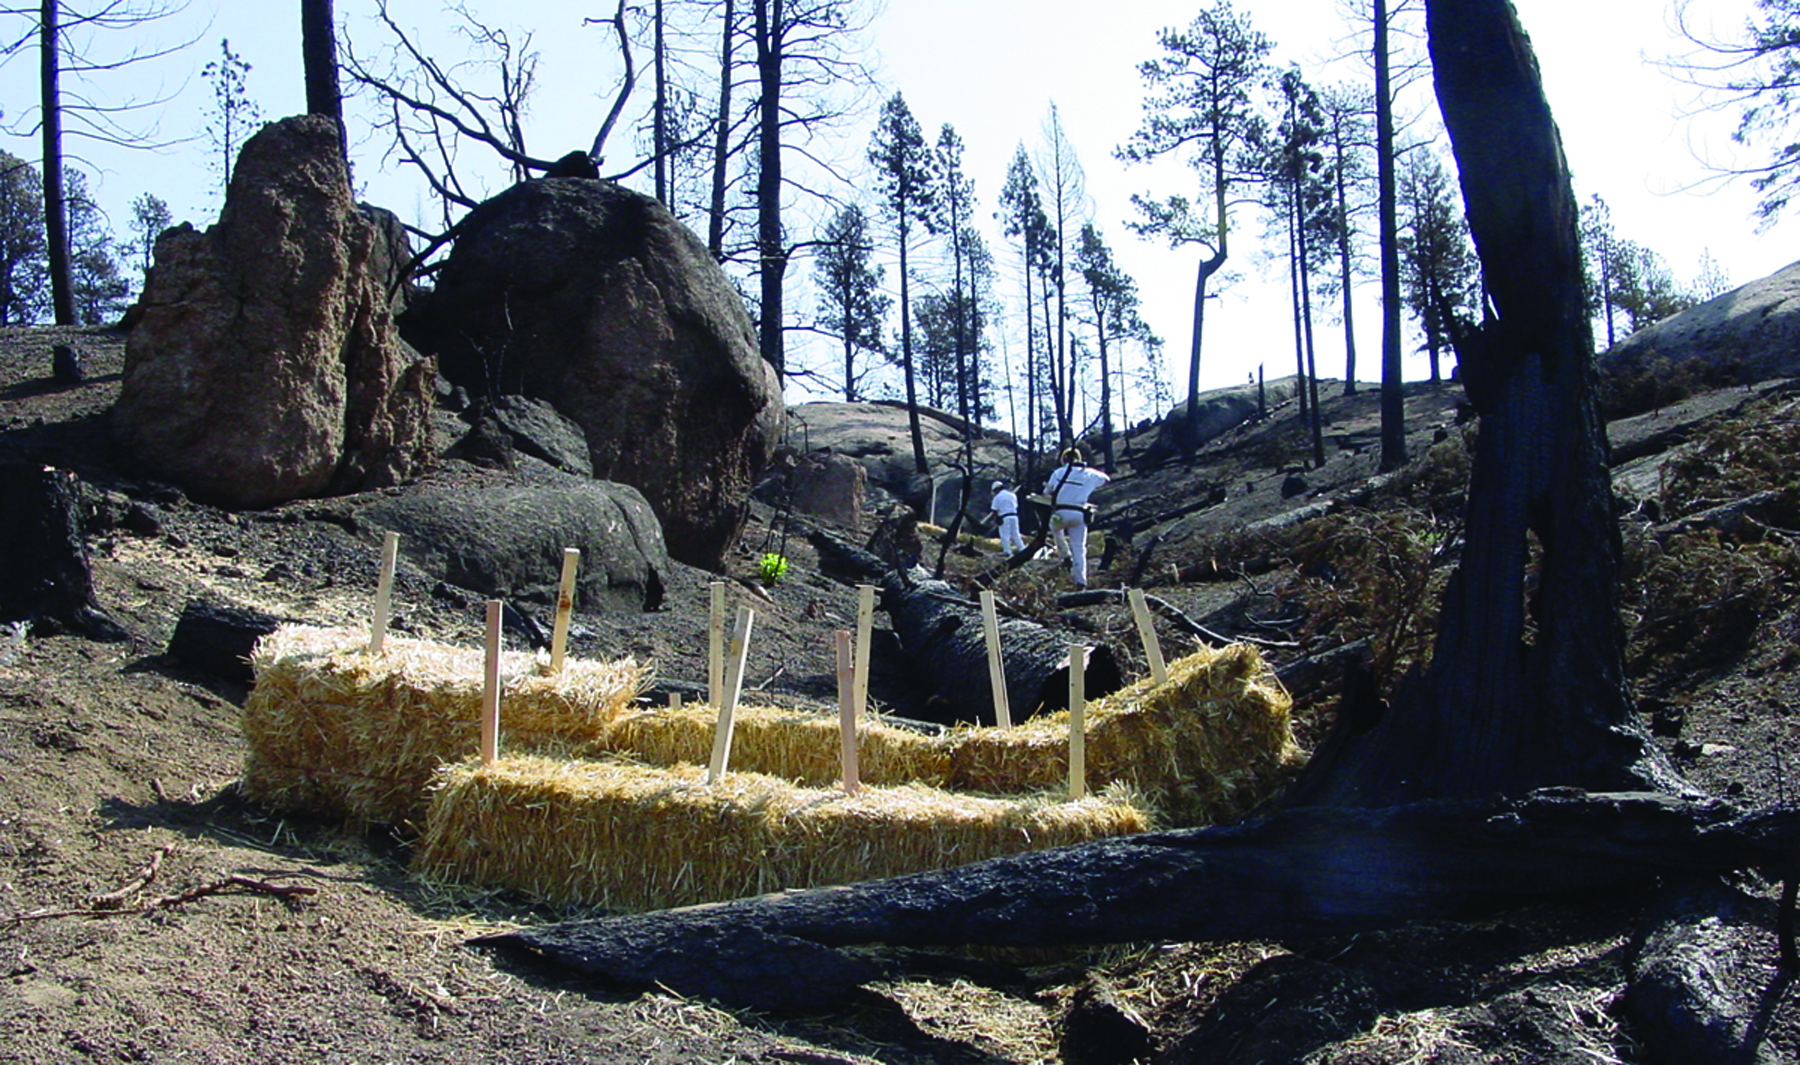 A sediment trap made of straw bales.